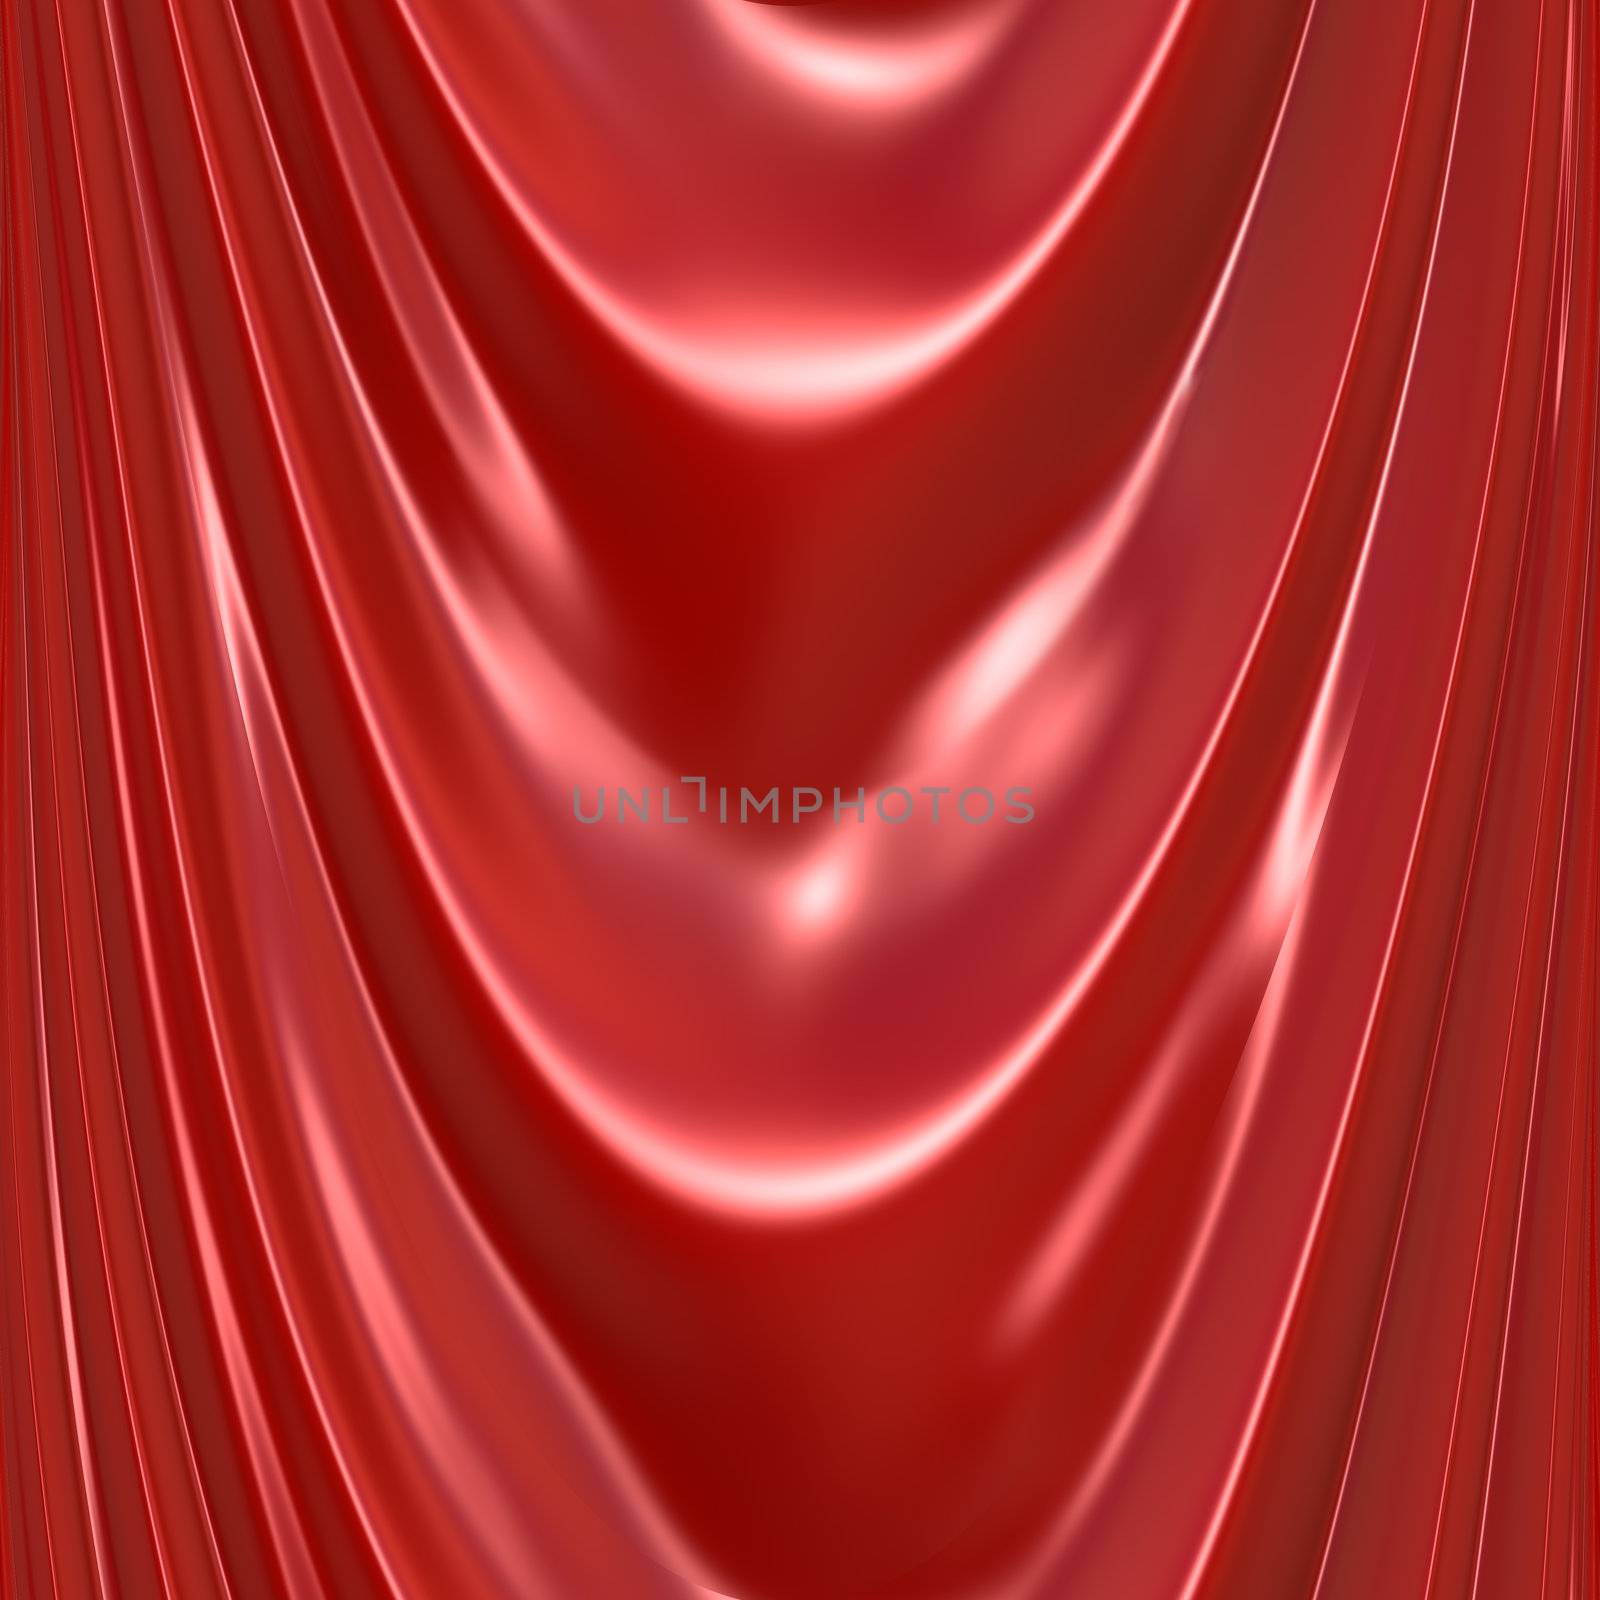 An illustration of a silky satin red drapery or curtain. This tiles seamlessly as a pattern in any direction.